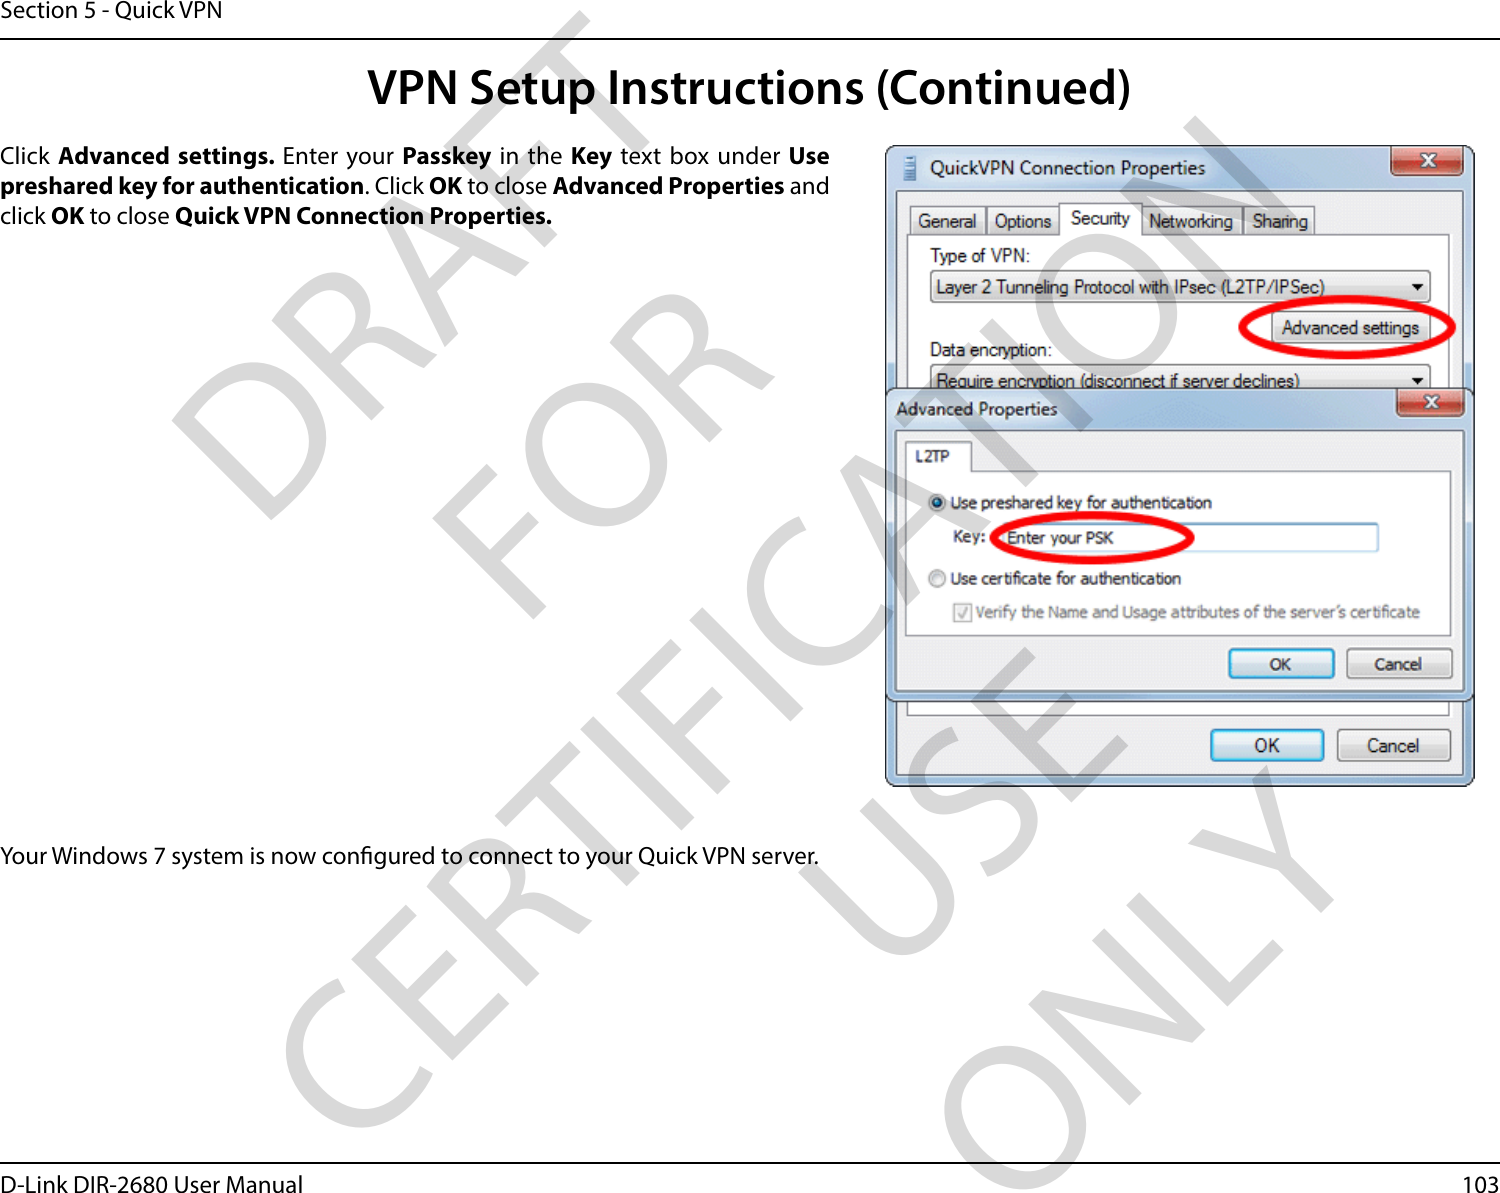 103D-Link DIR-2680 User ManualSection 5 - Quick VPNYour Windows 7 system is now congured to connect to your Quick VPN server.Click Advanced settings. Enter your Passkey in the Key text box under Use preshared key for authentication. Click OK to close Advanced Properties and click OK to close Quick VPN Connection Properties.VPN Setup Instructions (Continued)DRAFT FOR CERTIFICATION USE ONLY